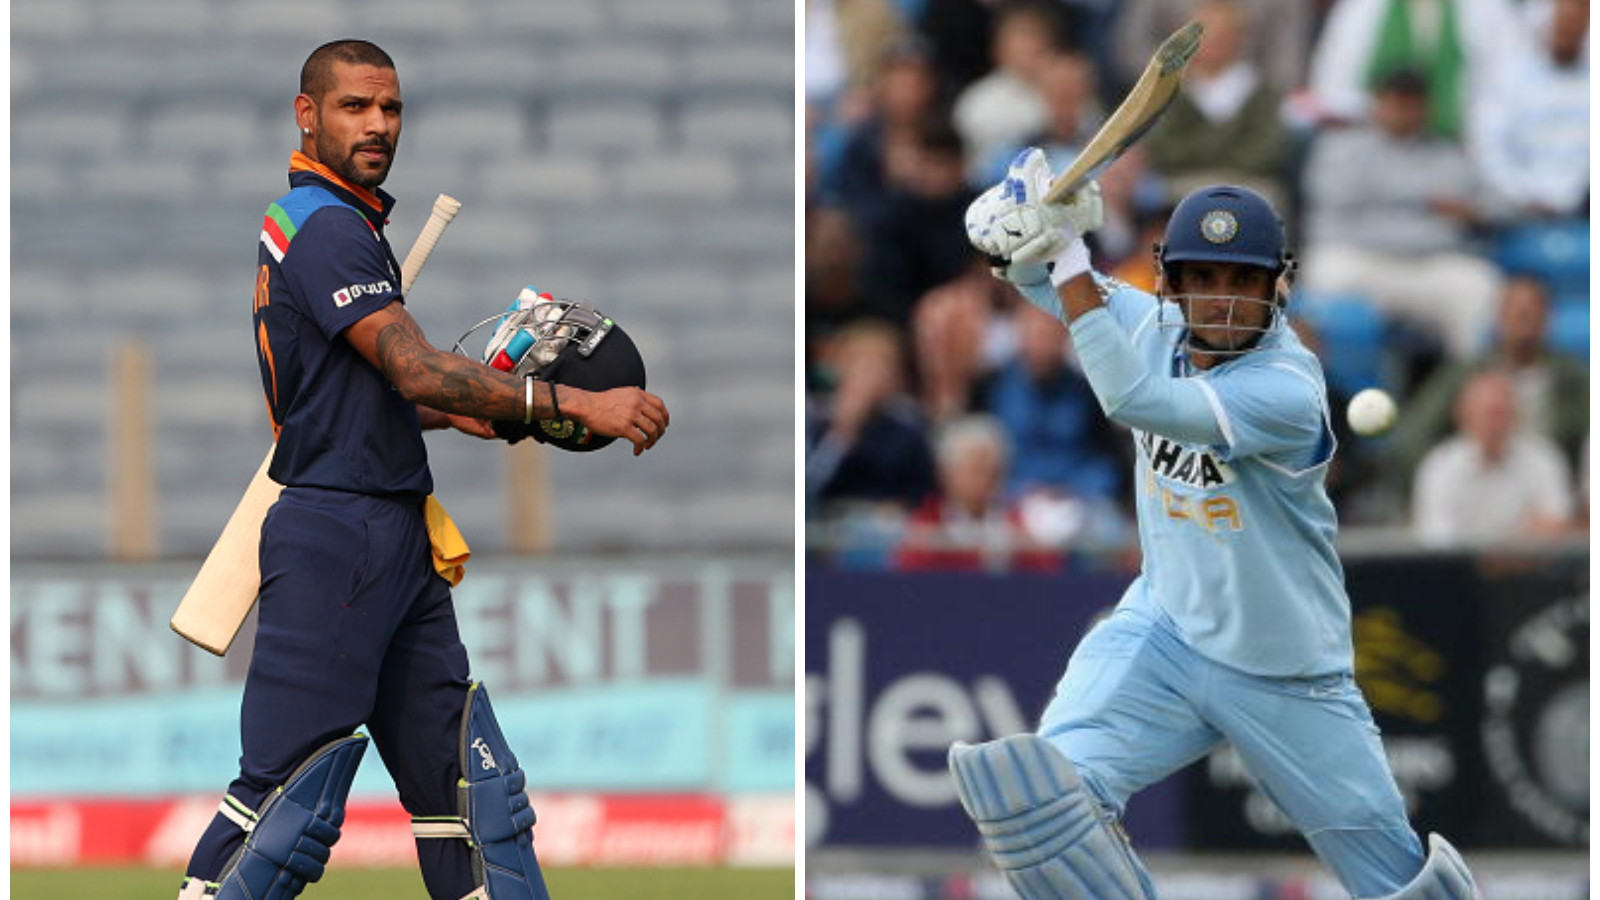 SL v IND 2021: Shikhar Dhawan could surpass Sourav Ganguly's record in 1st ODI